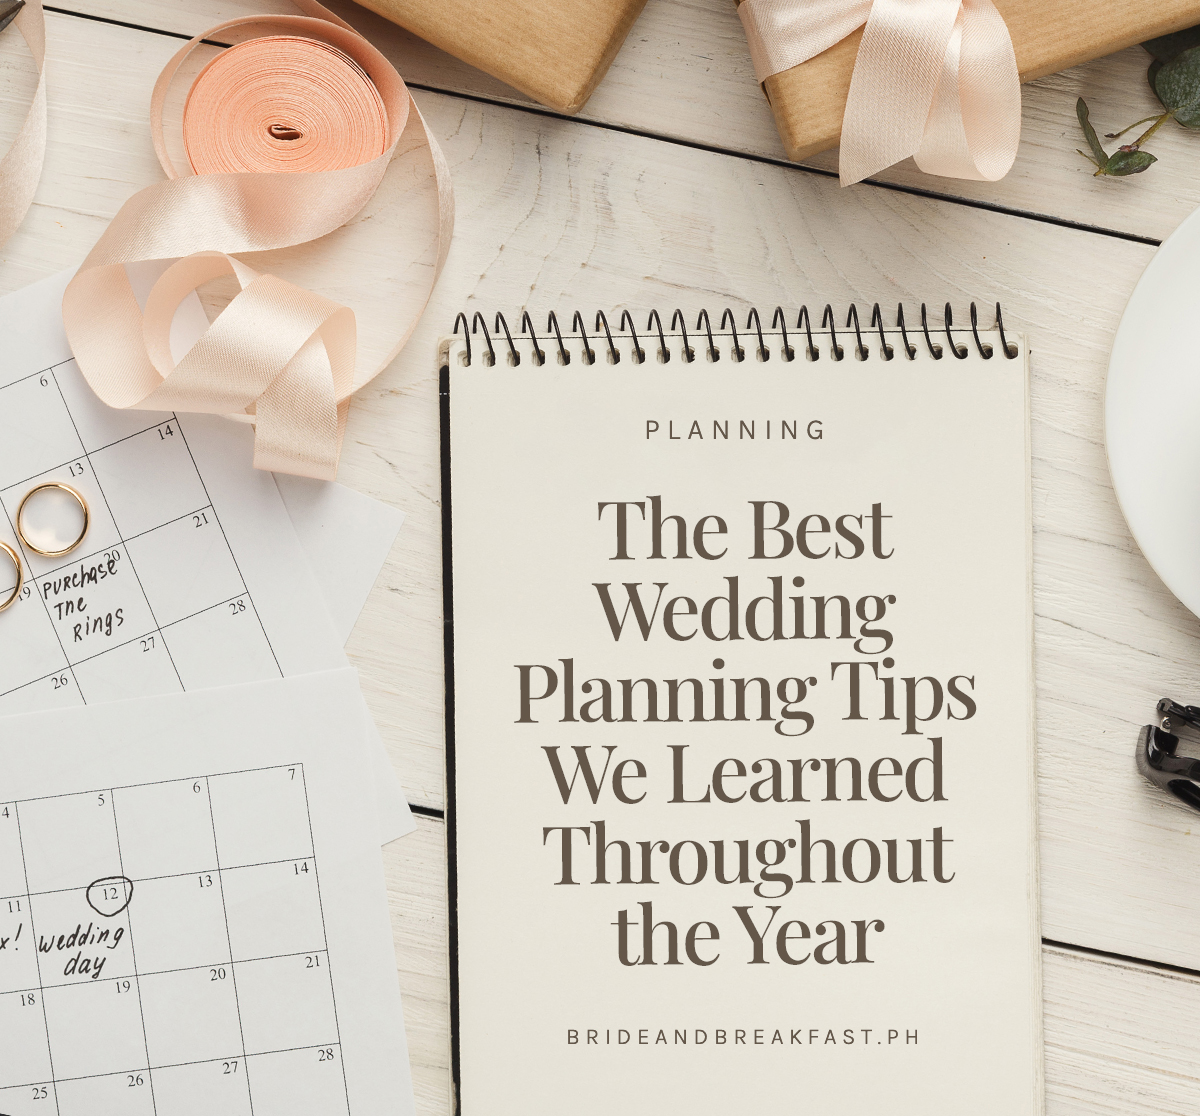 The Best Wedding Planning Tips We Learned Throughout the Year